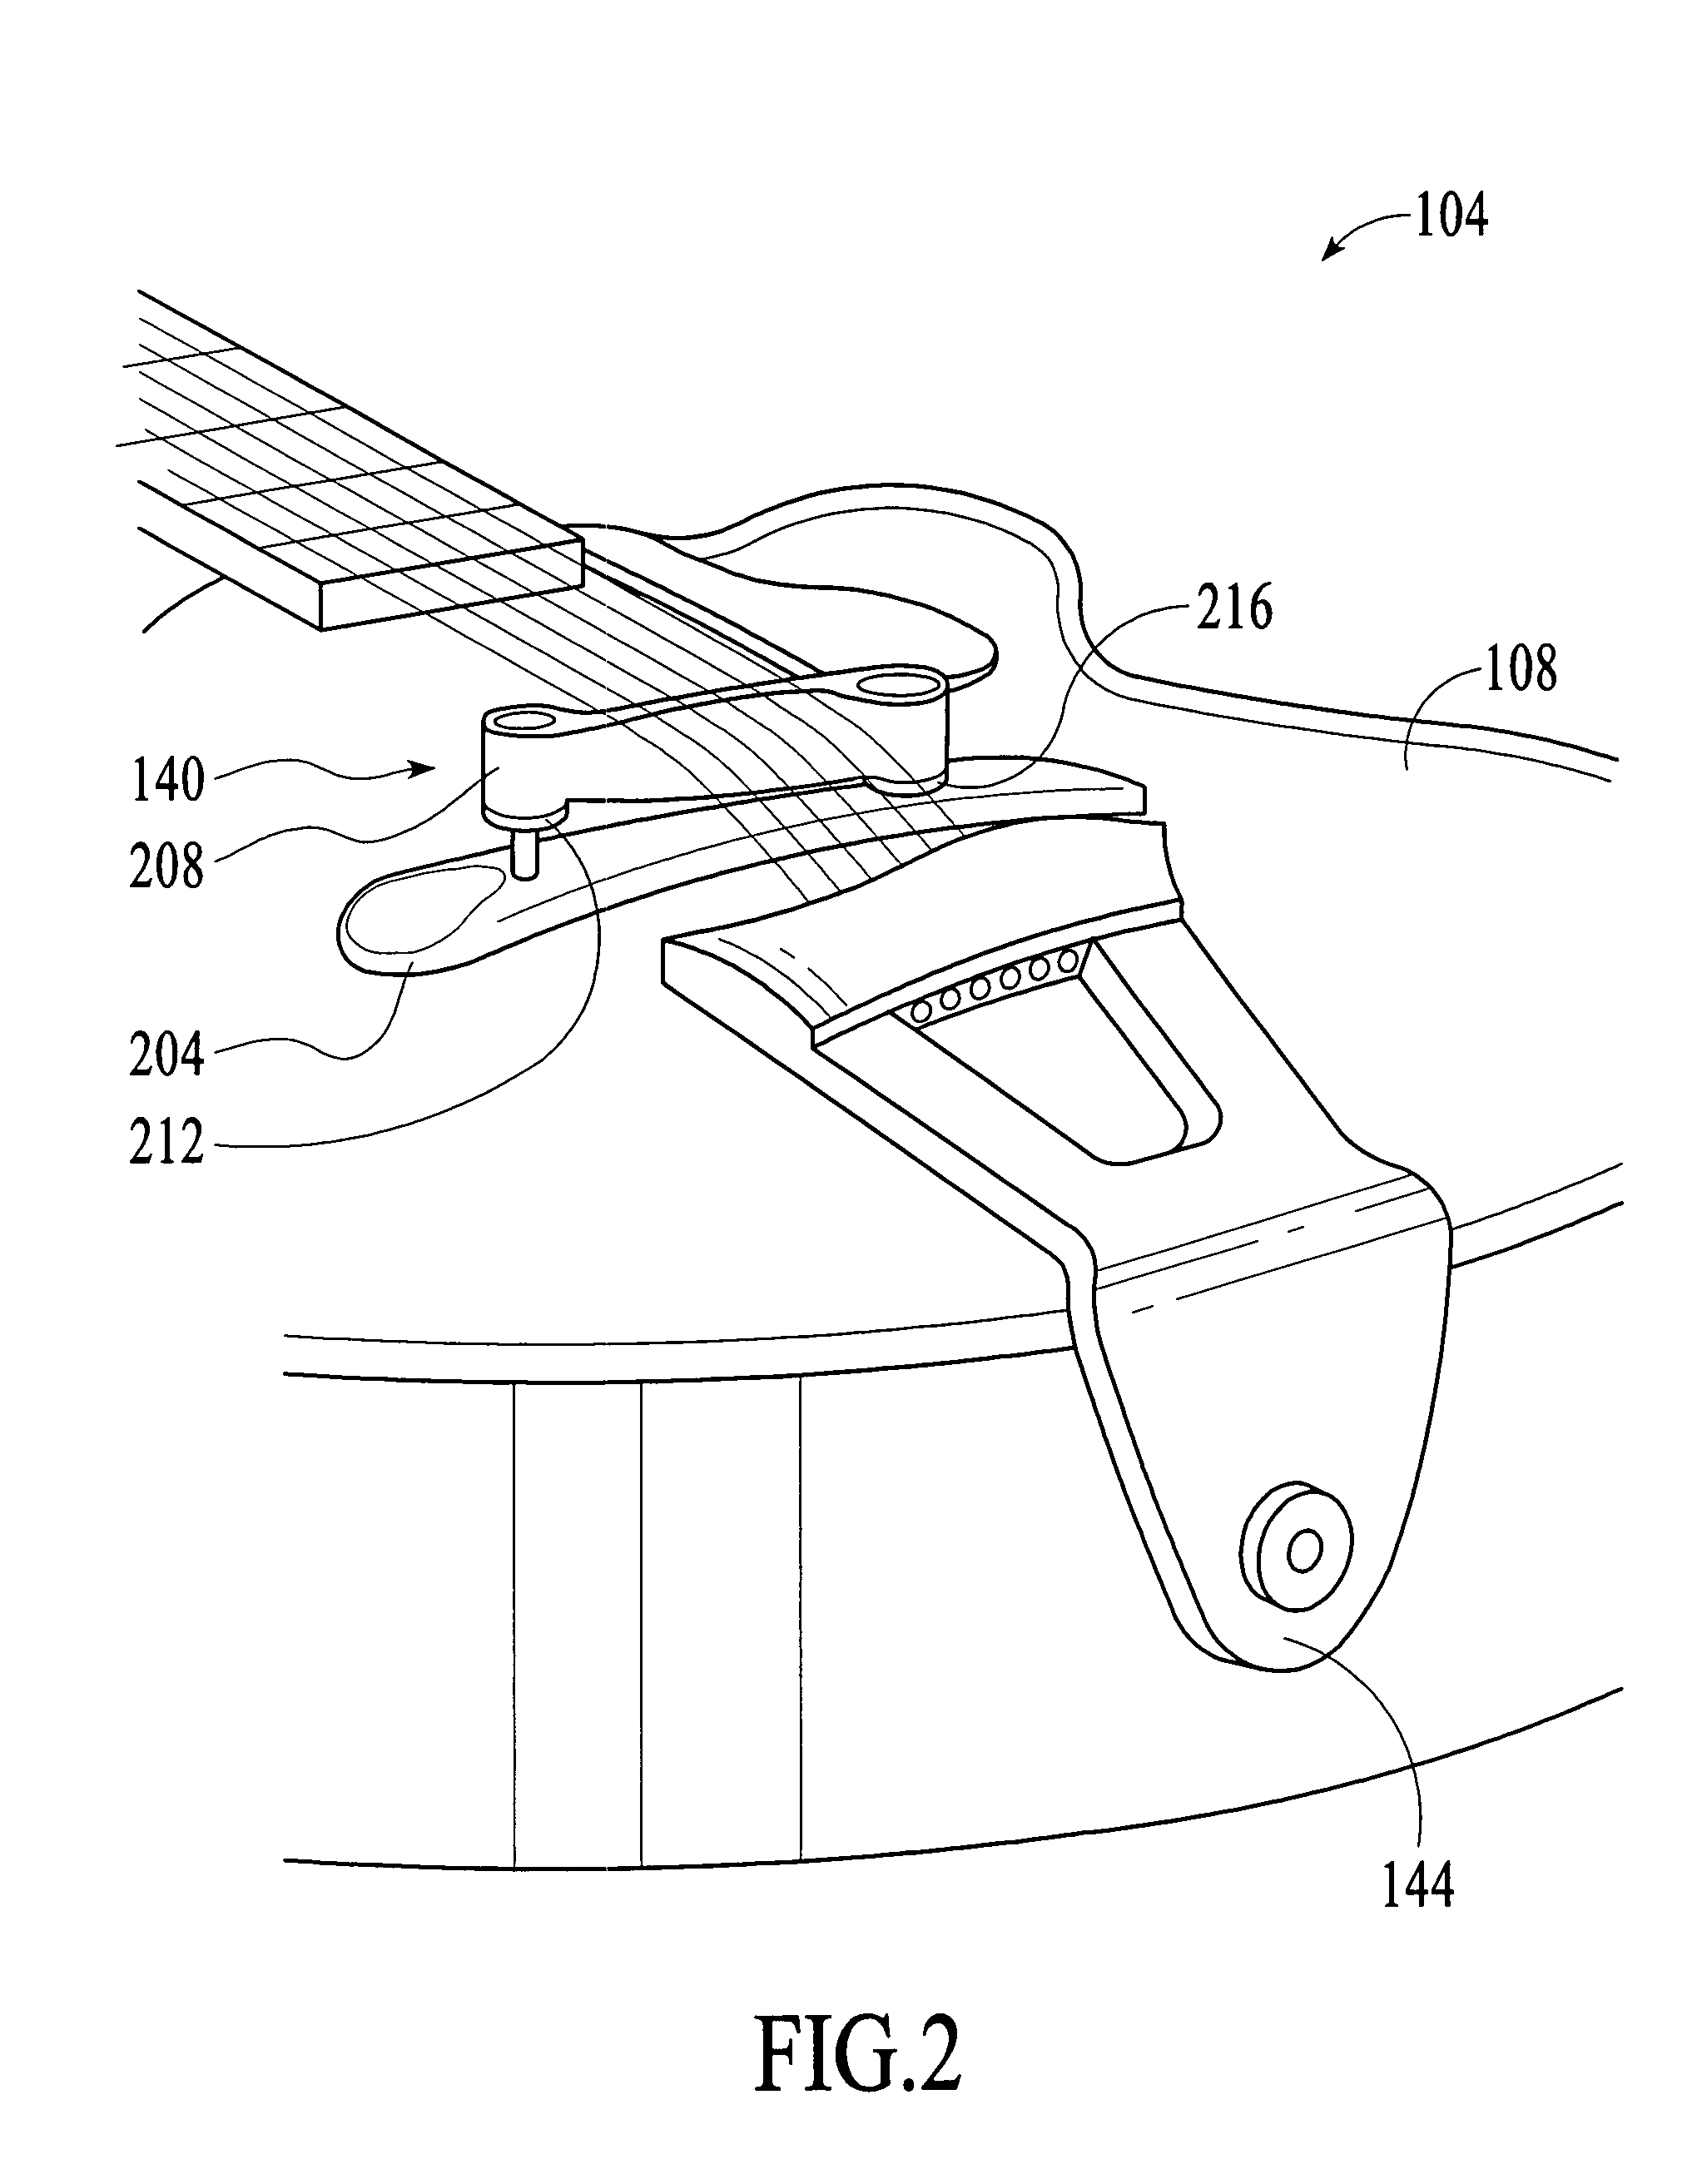 Stringed musical instrument having a hybrid arch-top and flat-top soundboard